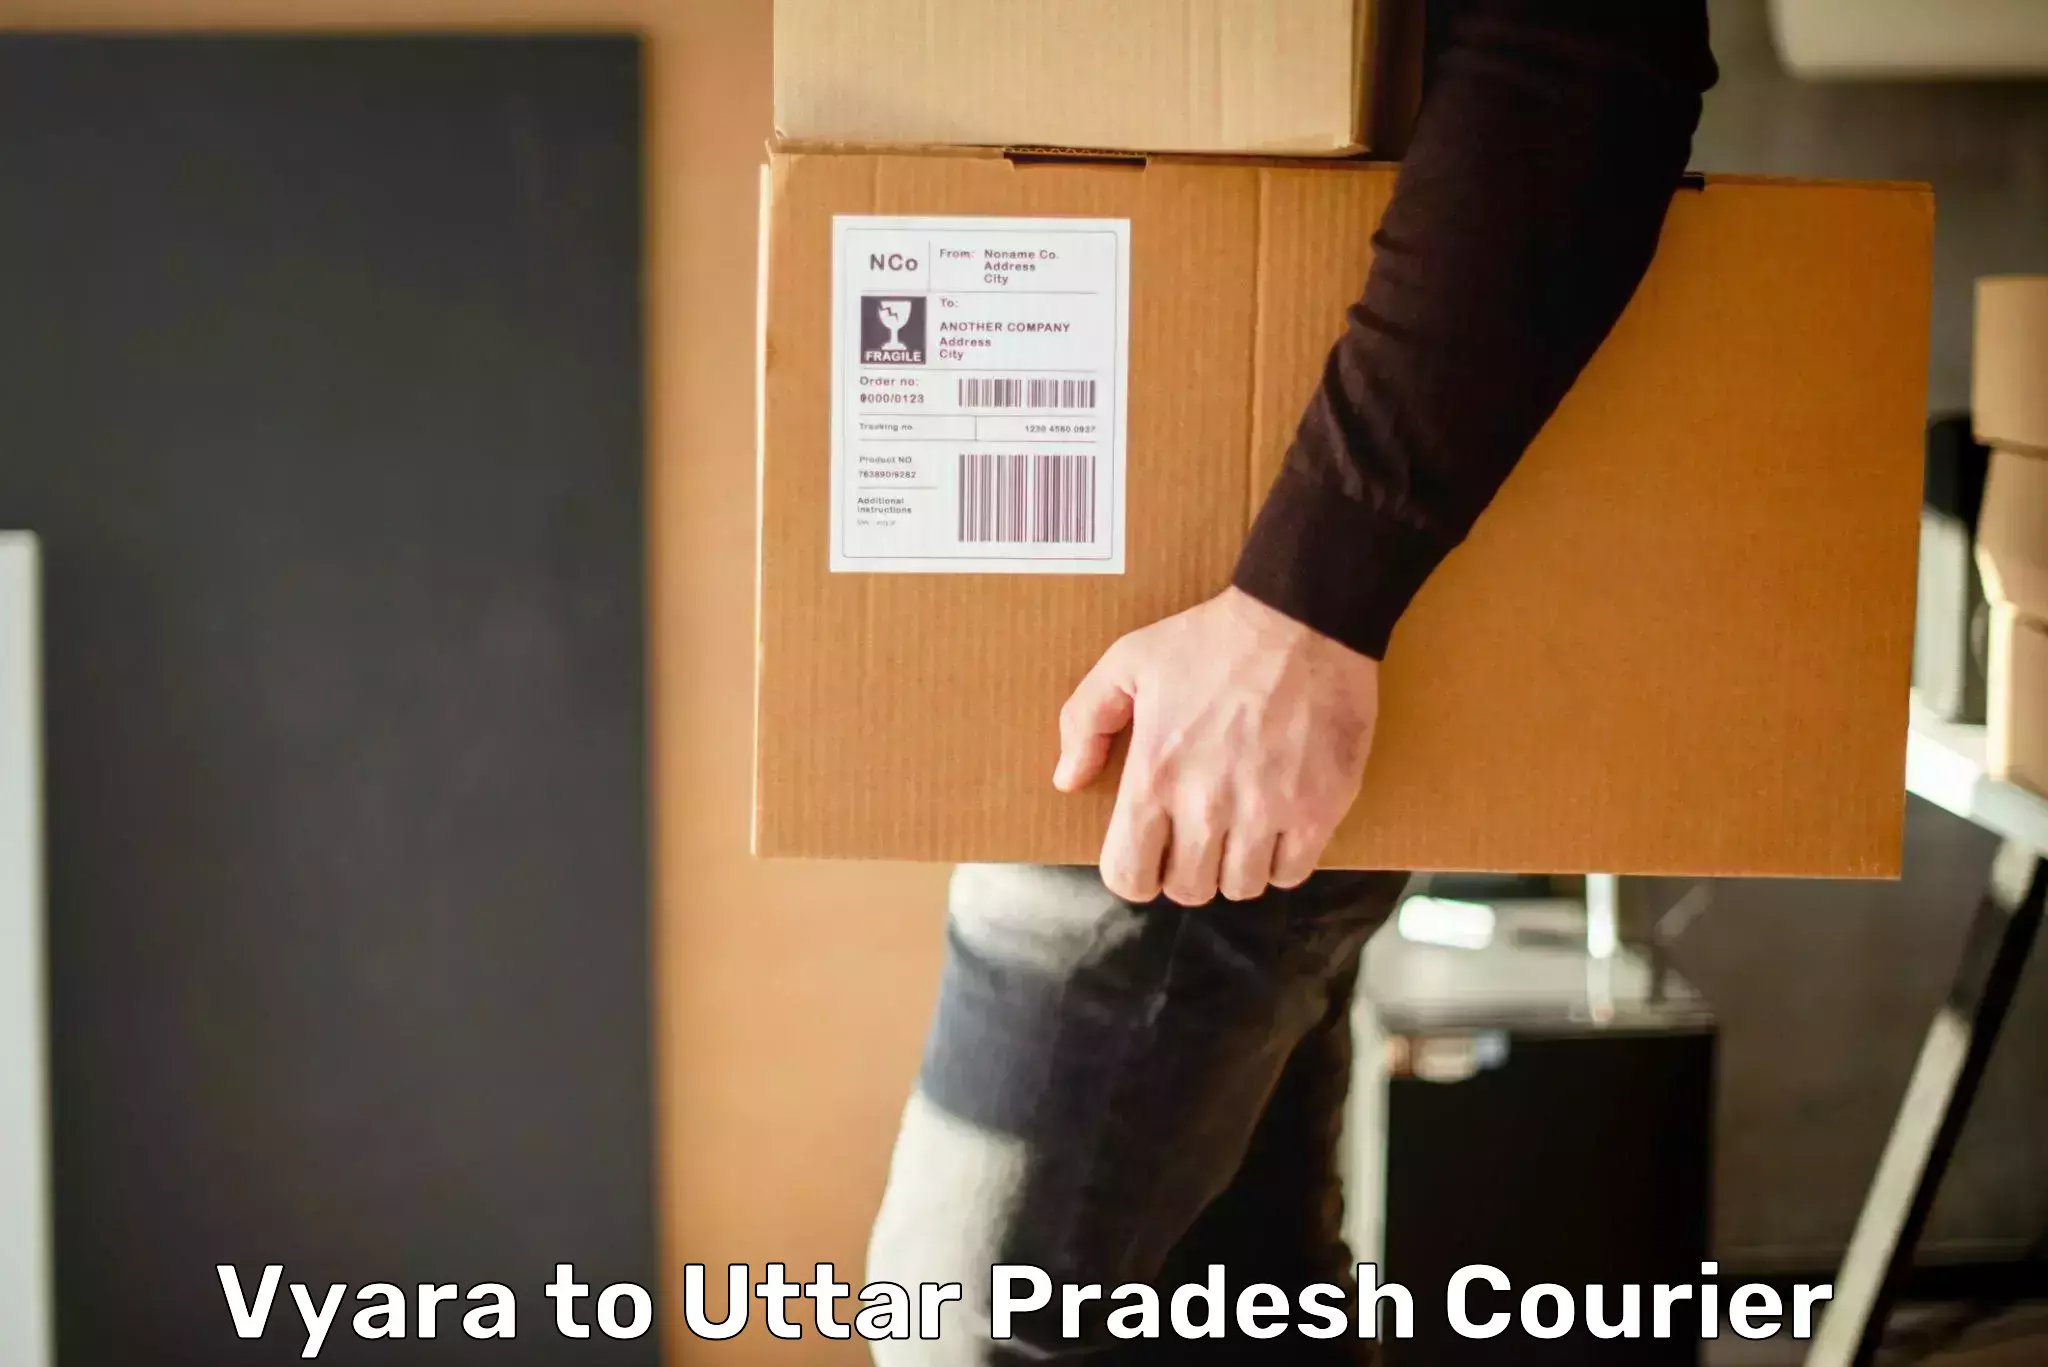 Ocean freight courier Vyara to Kanpur